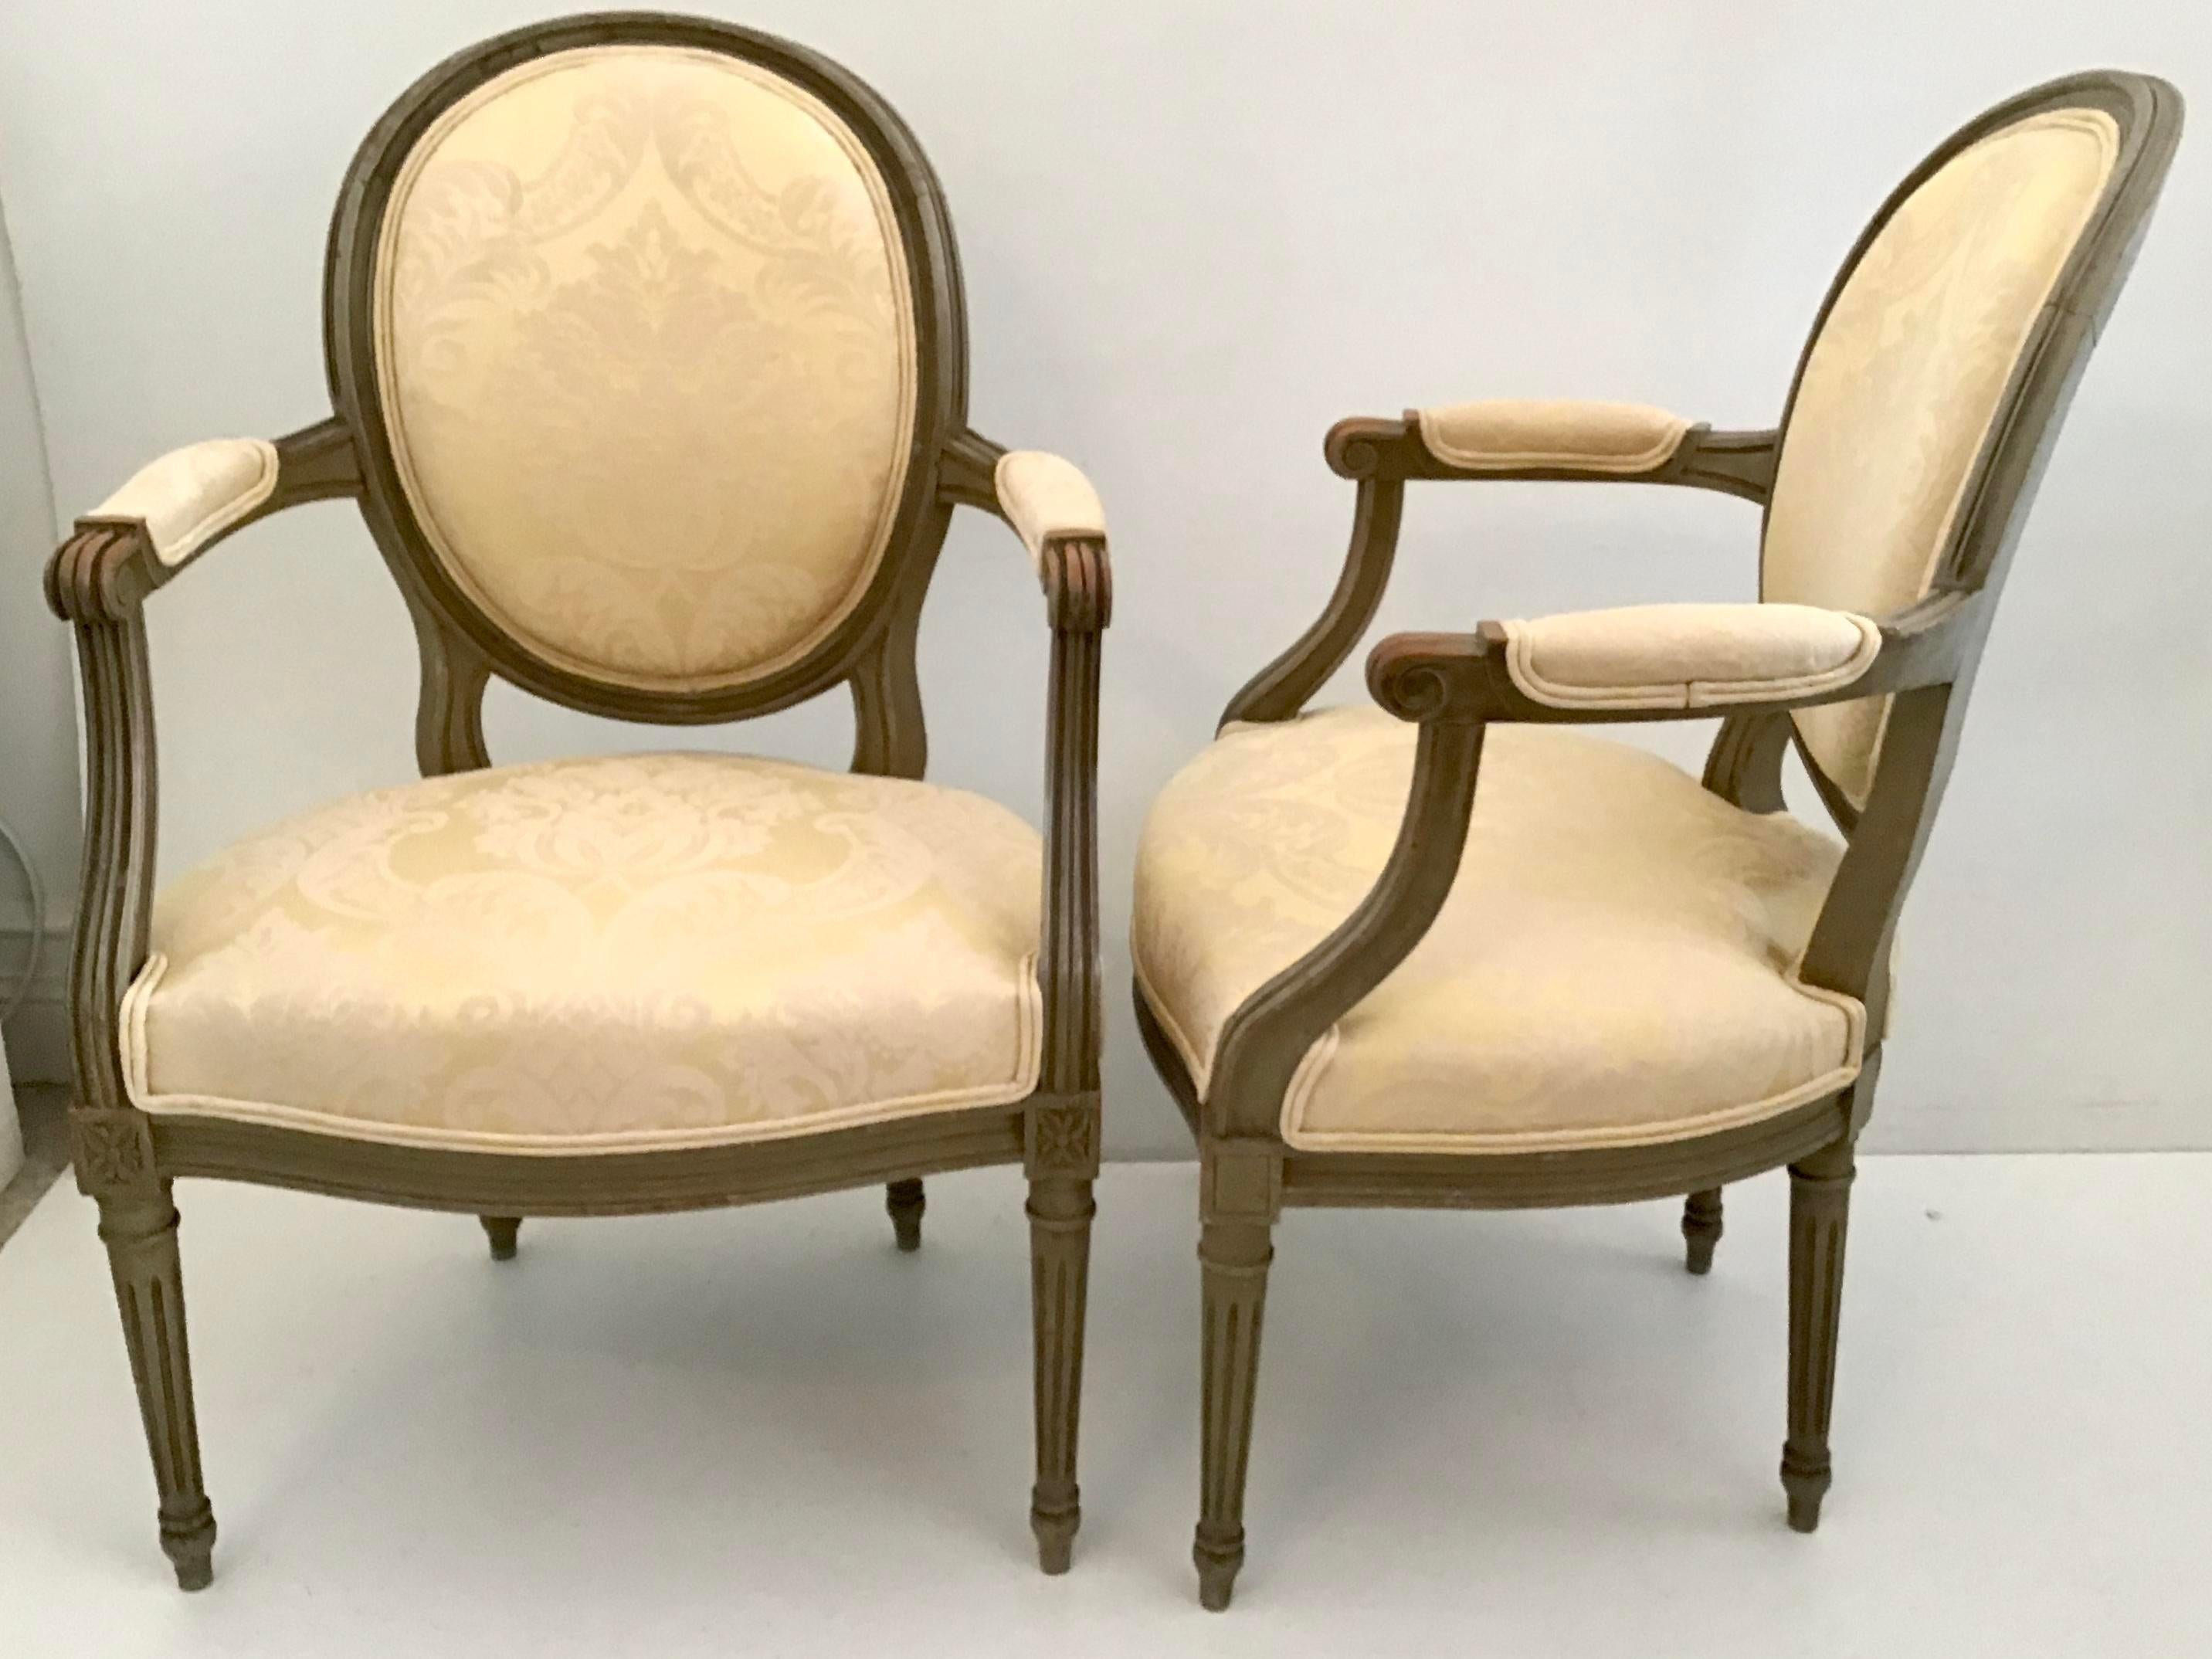 Gorgeous Classic French Louis XVI Fauteuils in a Great painted finish with New Yellow Damask Upholstery. Add Instant Classic French Style to your decor. Beautiful Classical chairs!